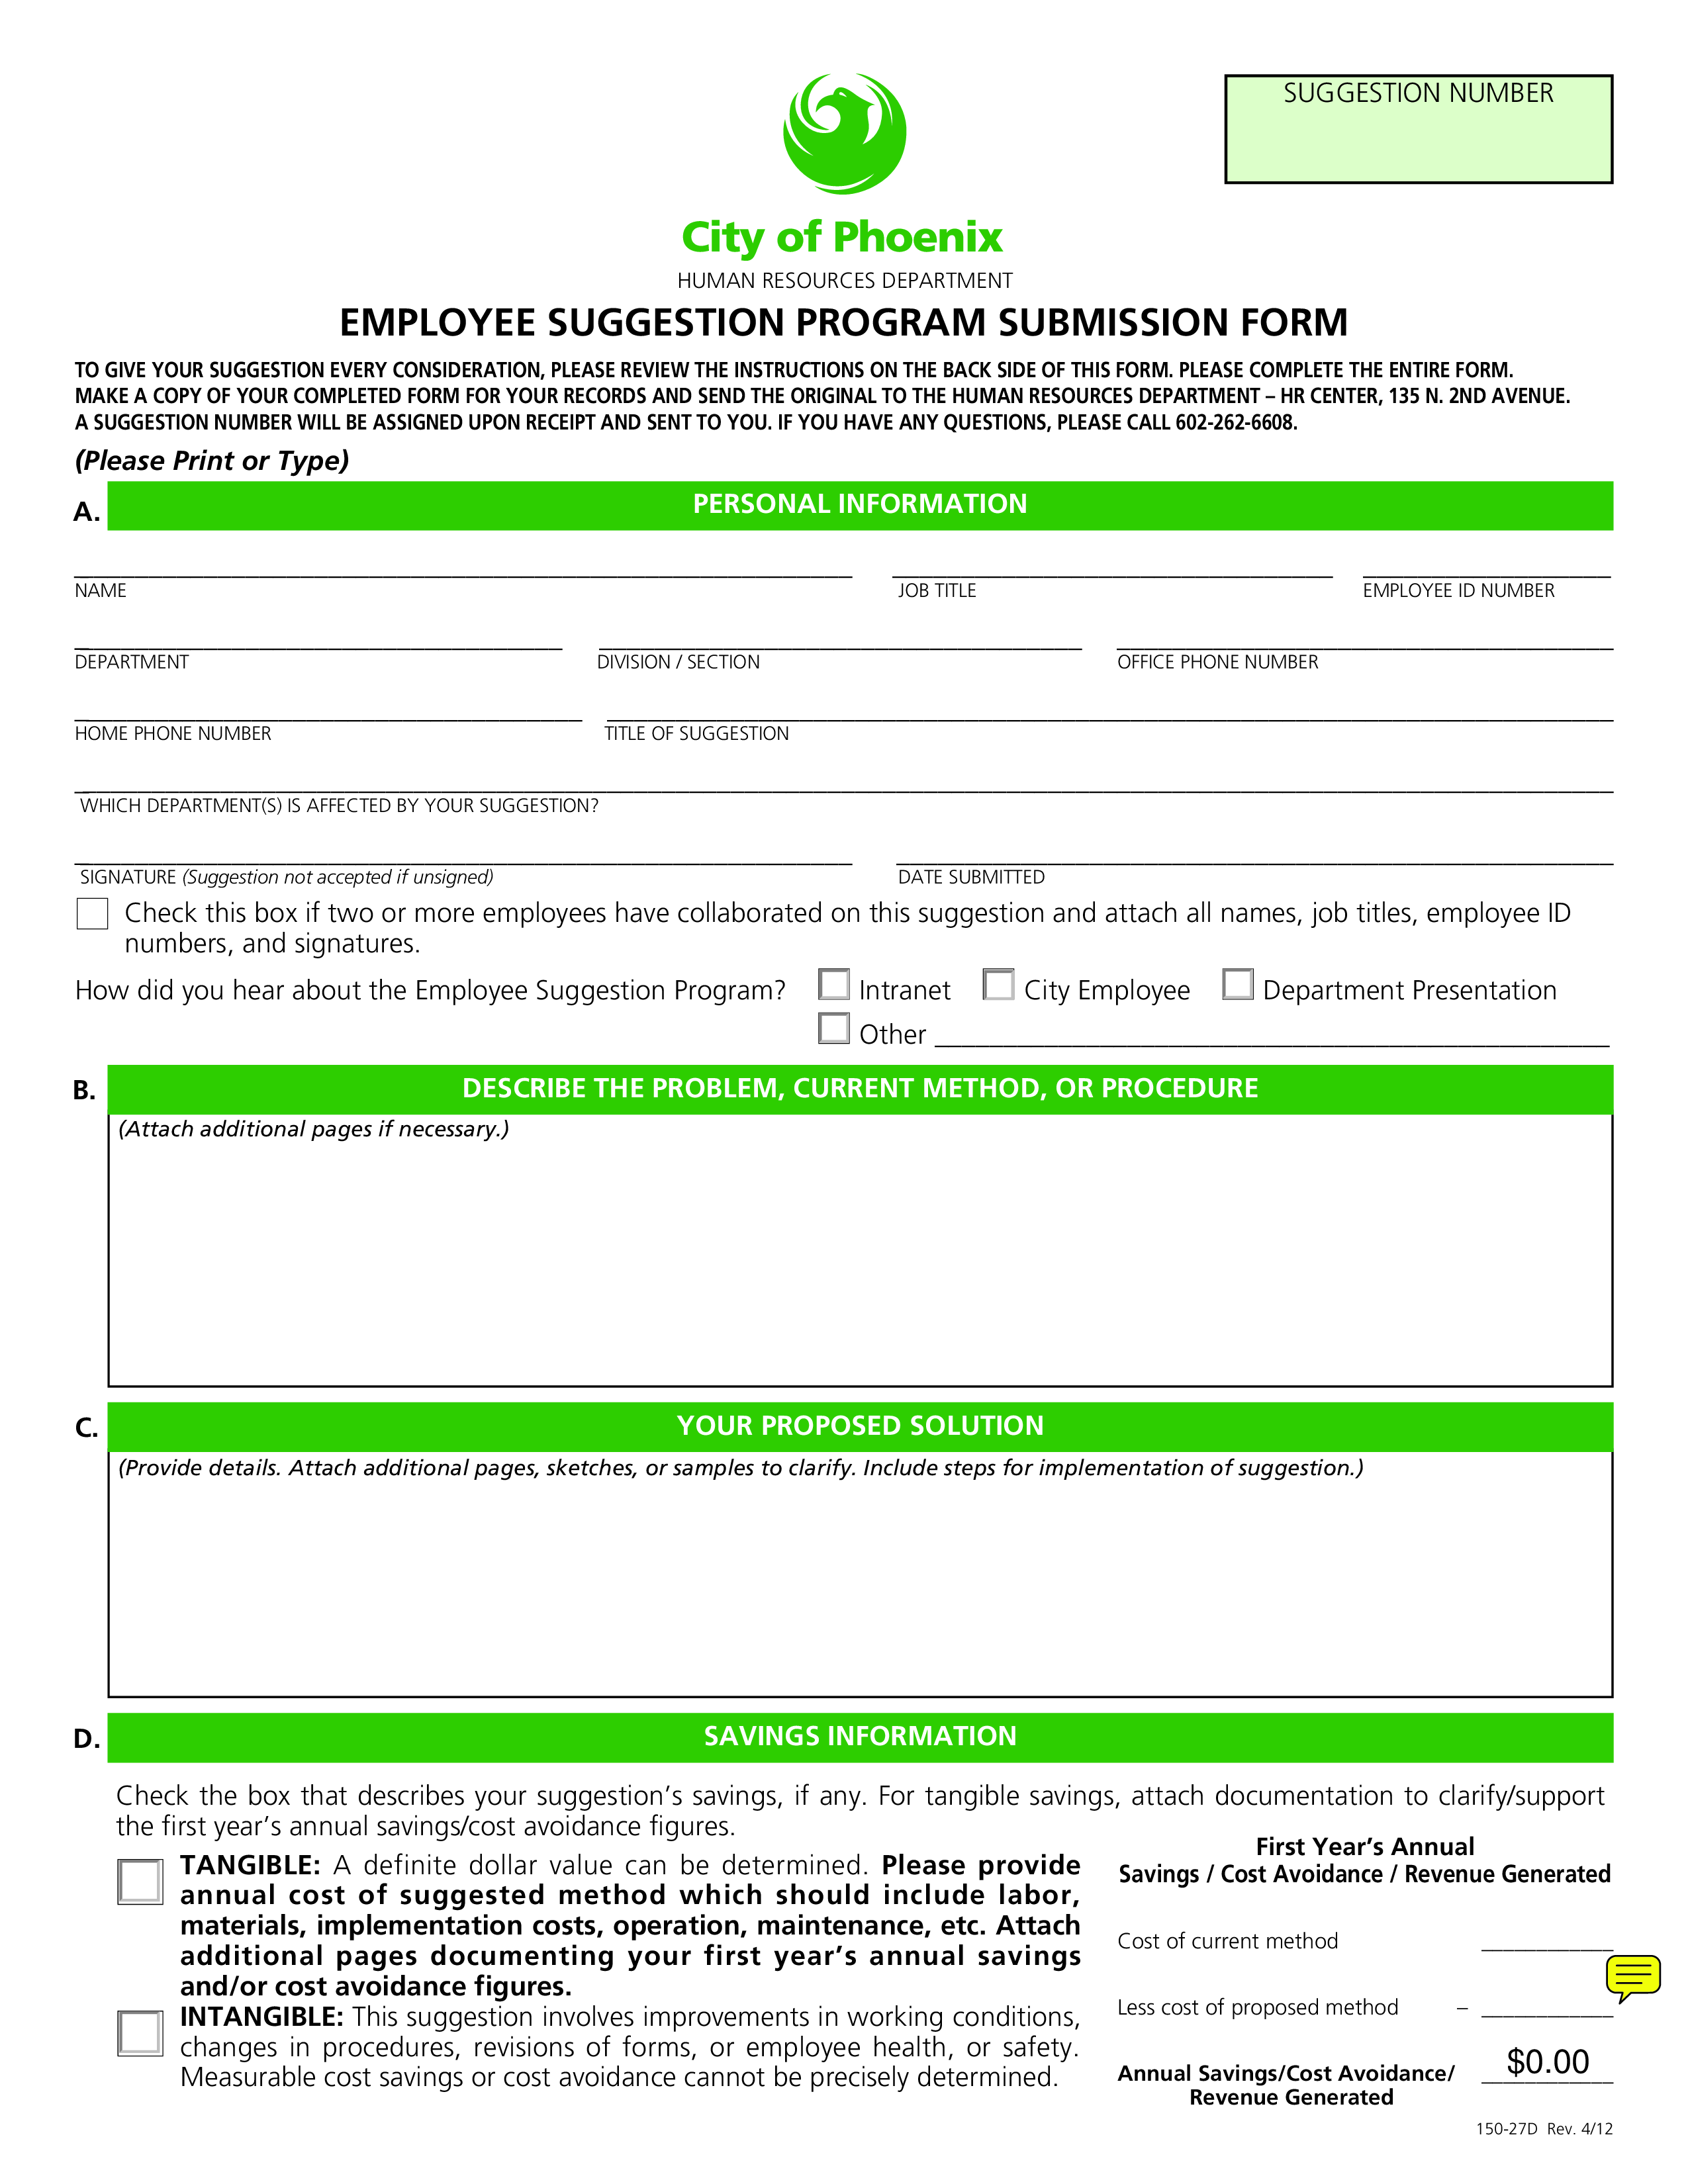 Employee Suggestion Submission Form main image